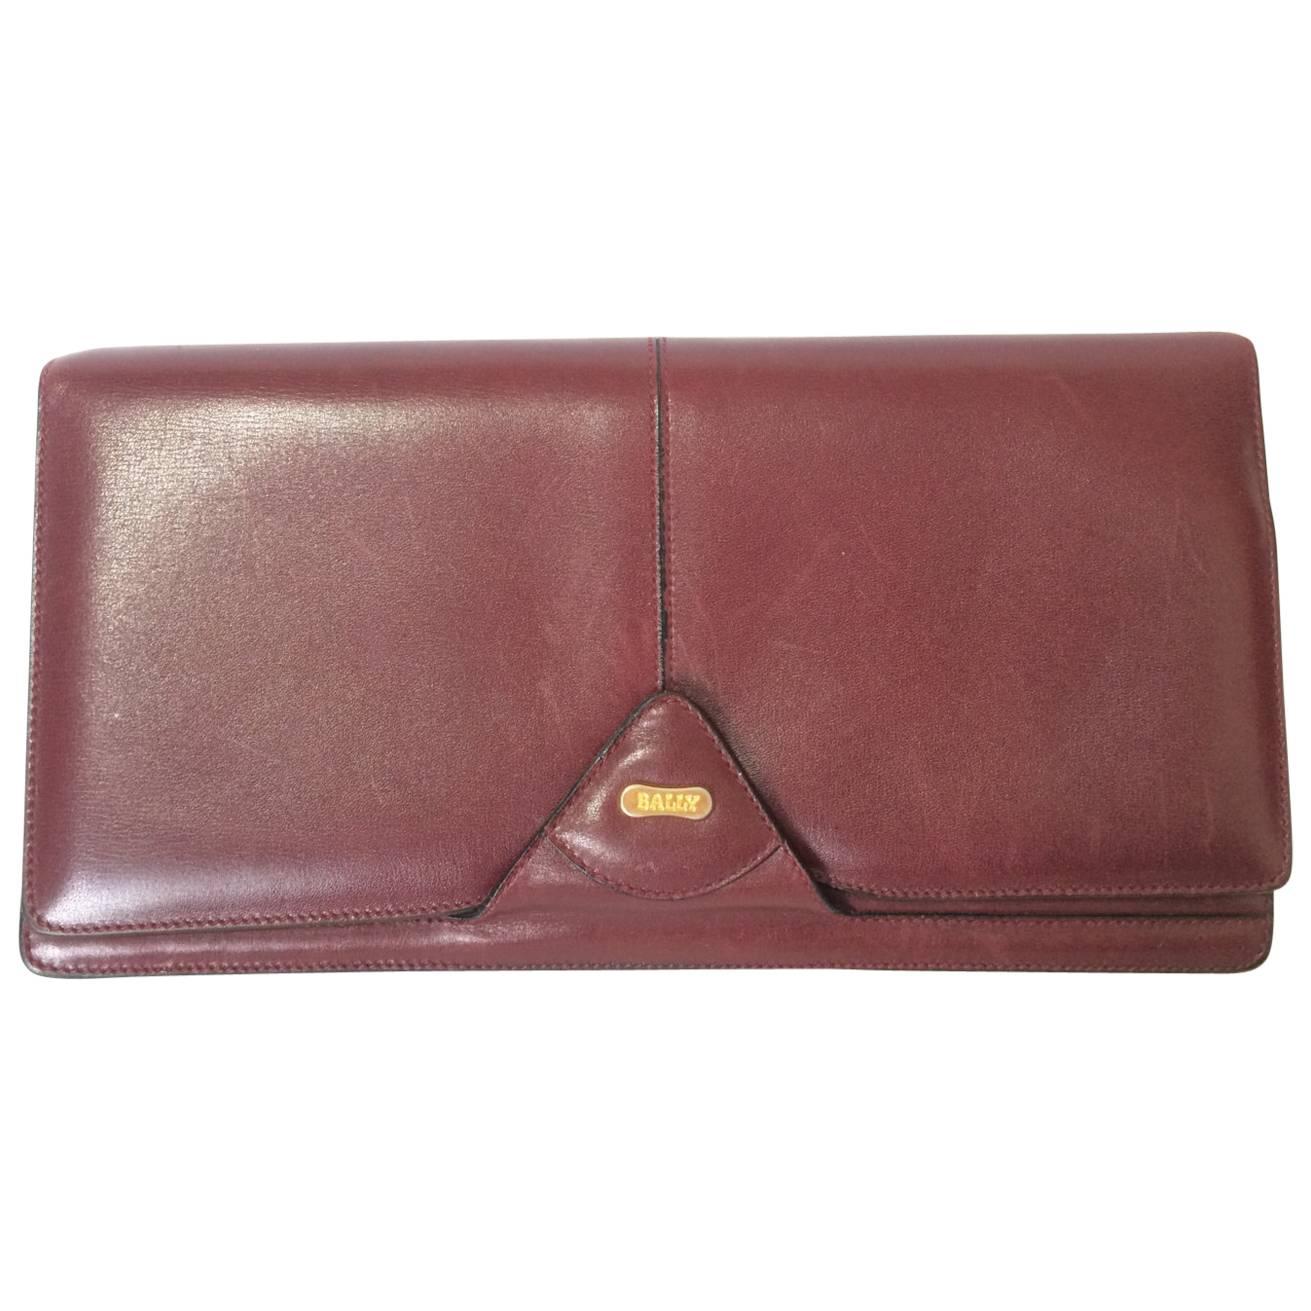 Vintage Bally wine leather clutch bag, party and classic purse with golden logo. For Sale